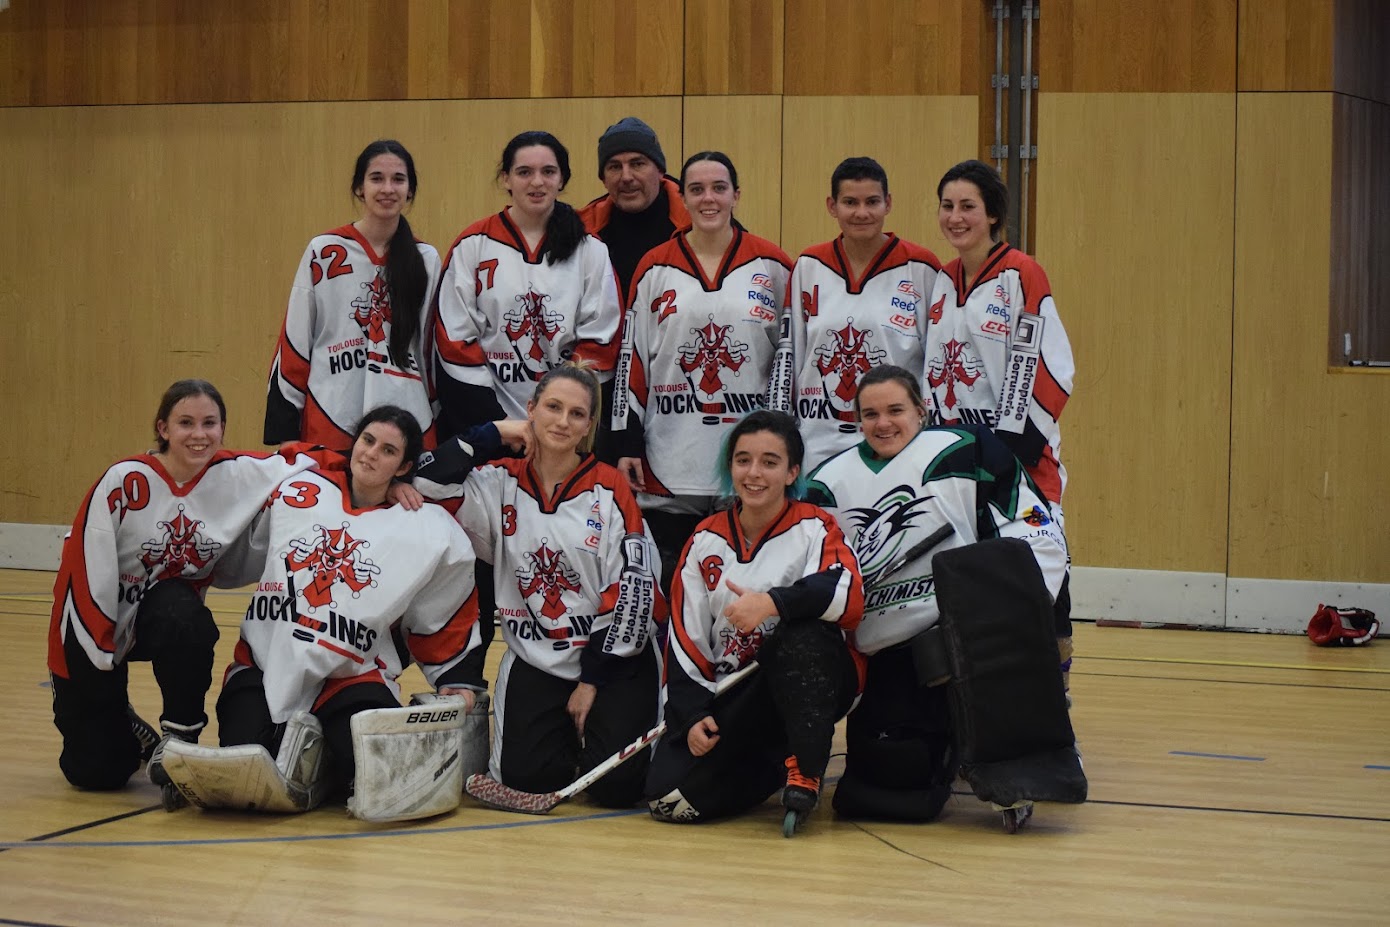 Hocklines Féminines Roller-Hockey Toulouse